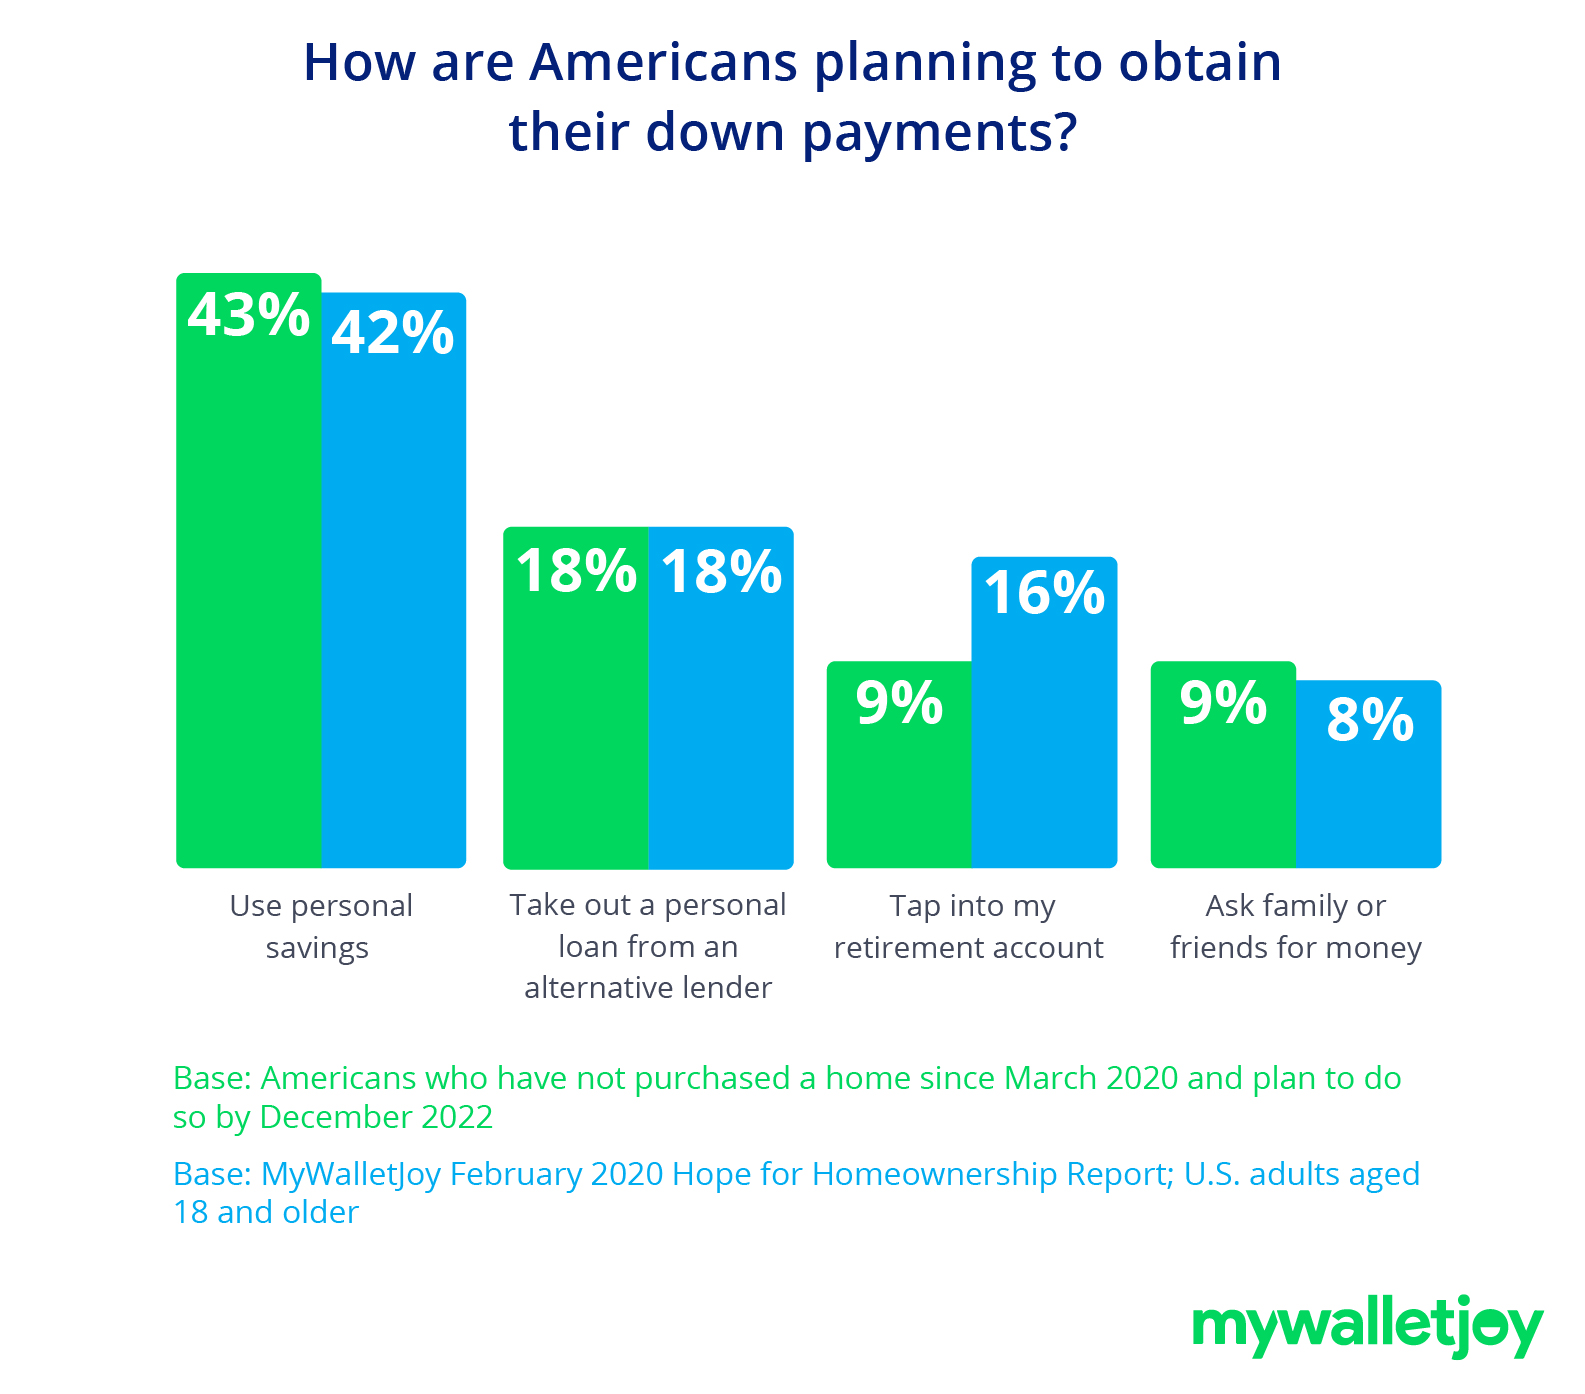 bar chart depicting how americans are planning to obtain their down payments